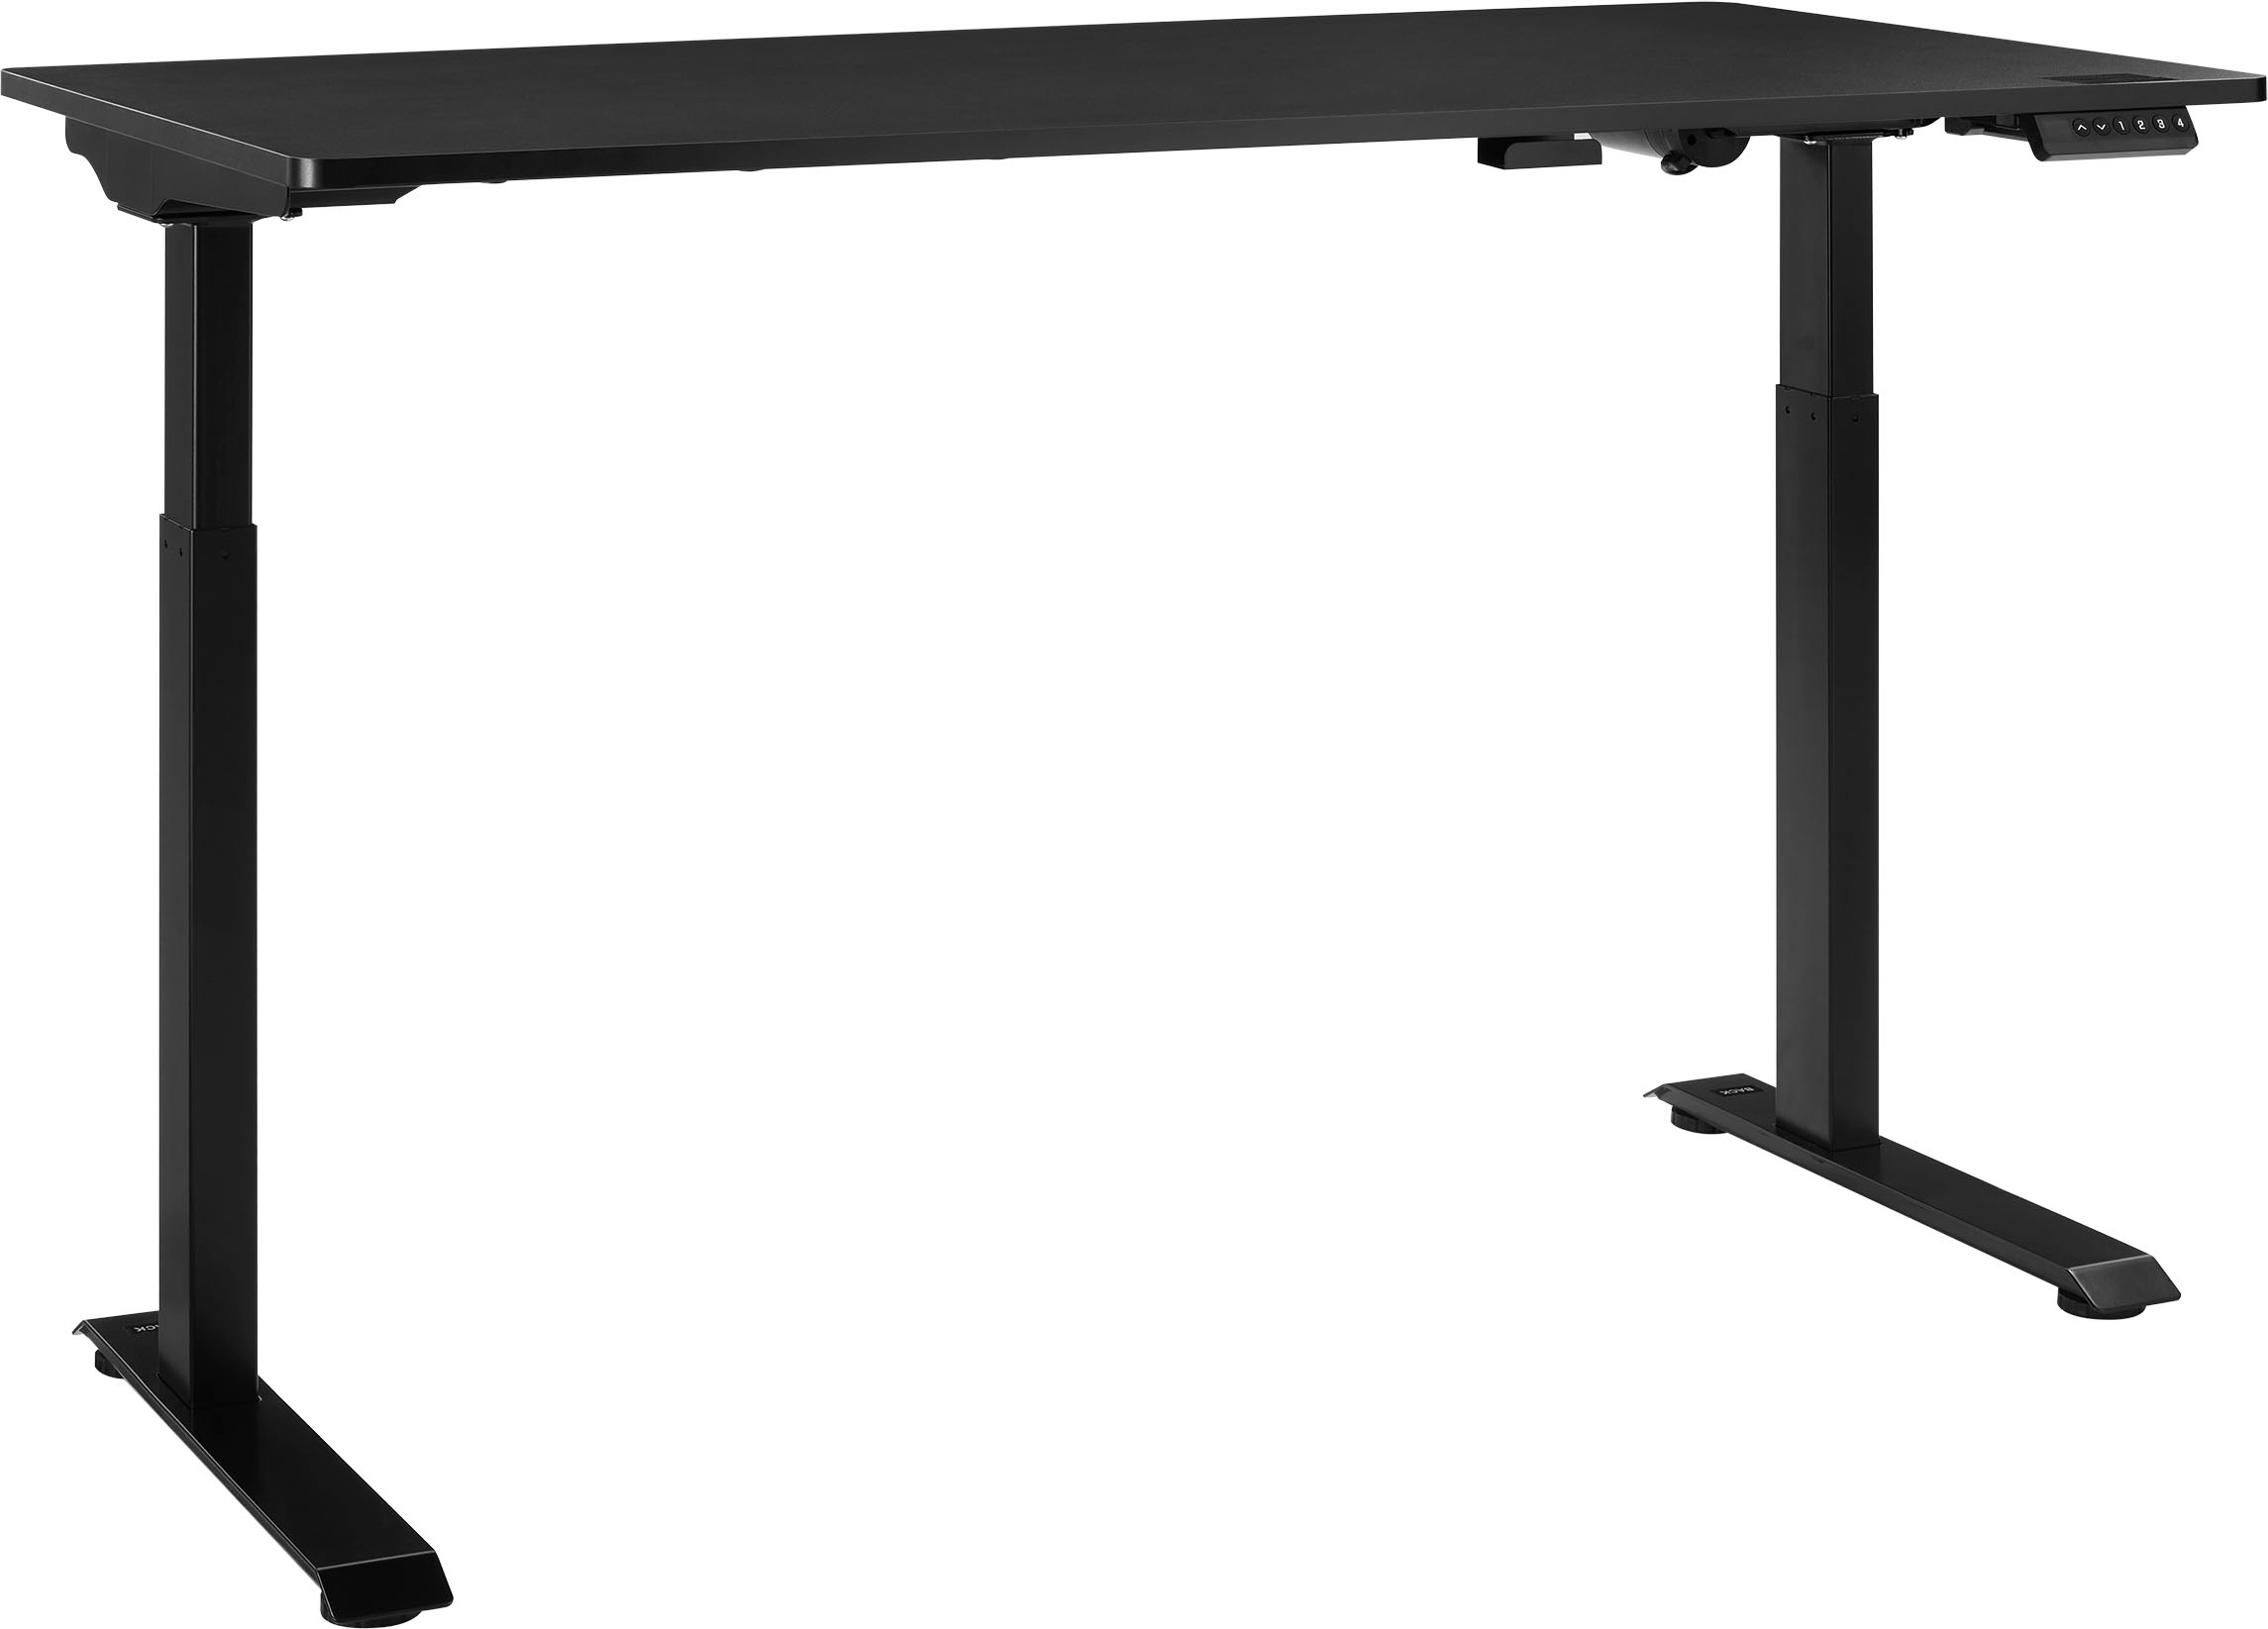 Angle View: Victor - High Rise Electric Triple Monitor Standing Desk - Black, Aluminum